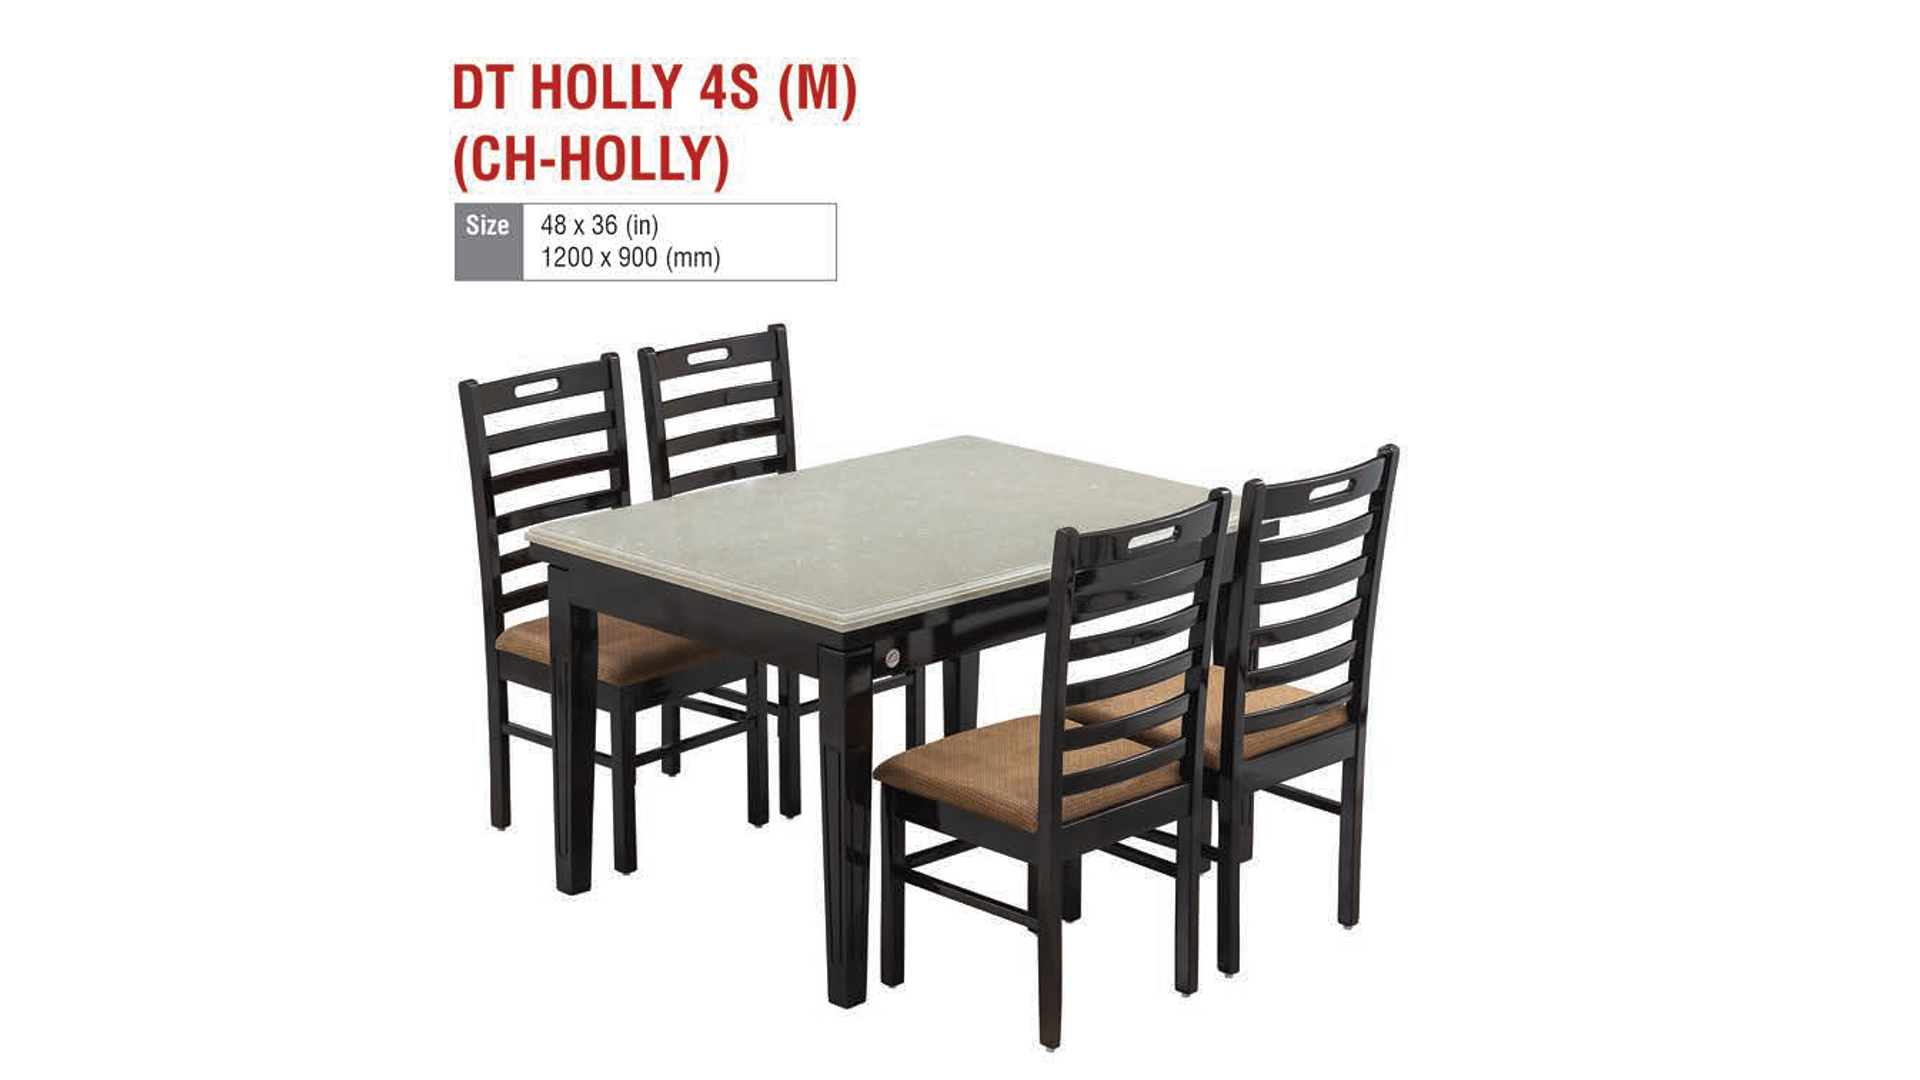 DT HOLLY 4S (M) (CH-HOLLY)